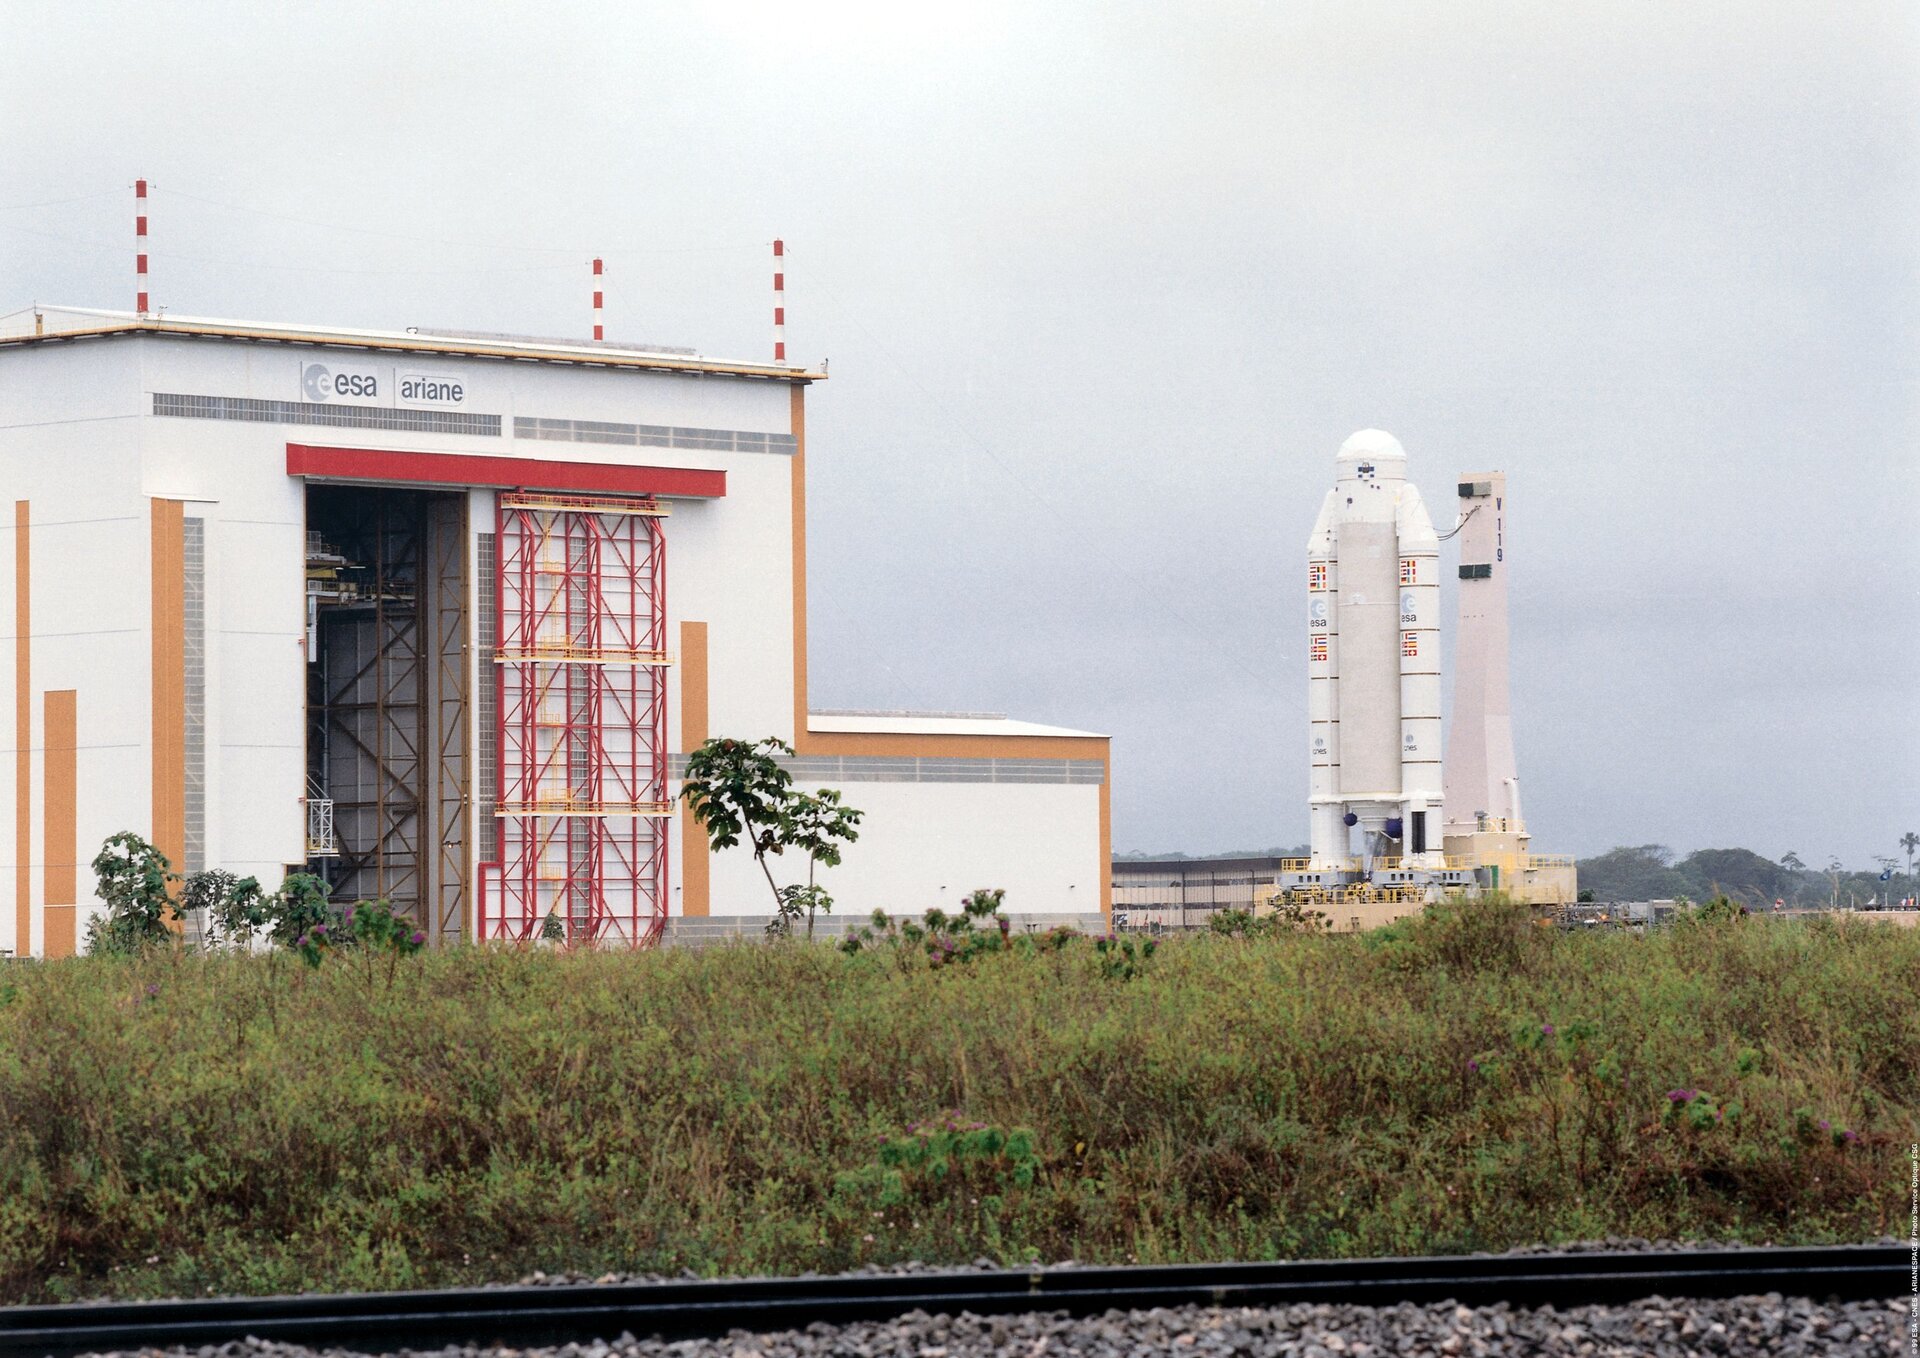 Launcher Integration Building - Ariane 504 transfer from the BIL